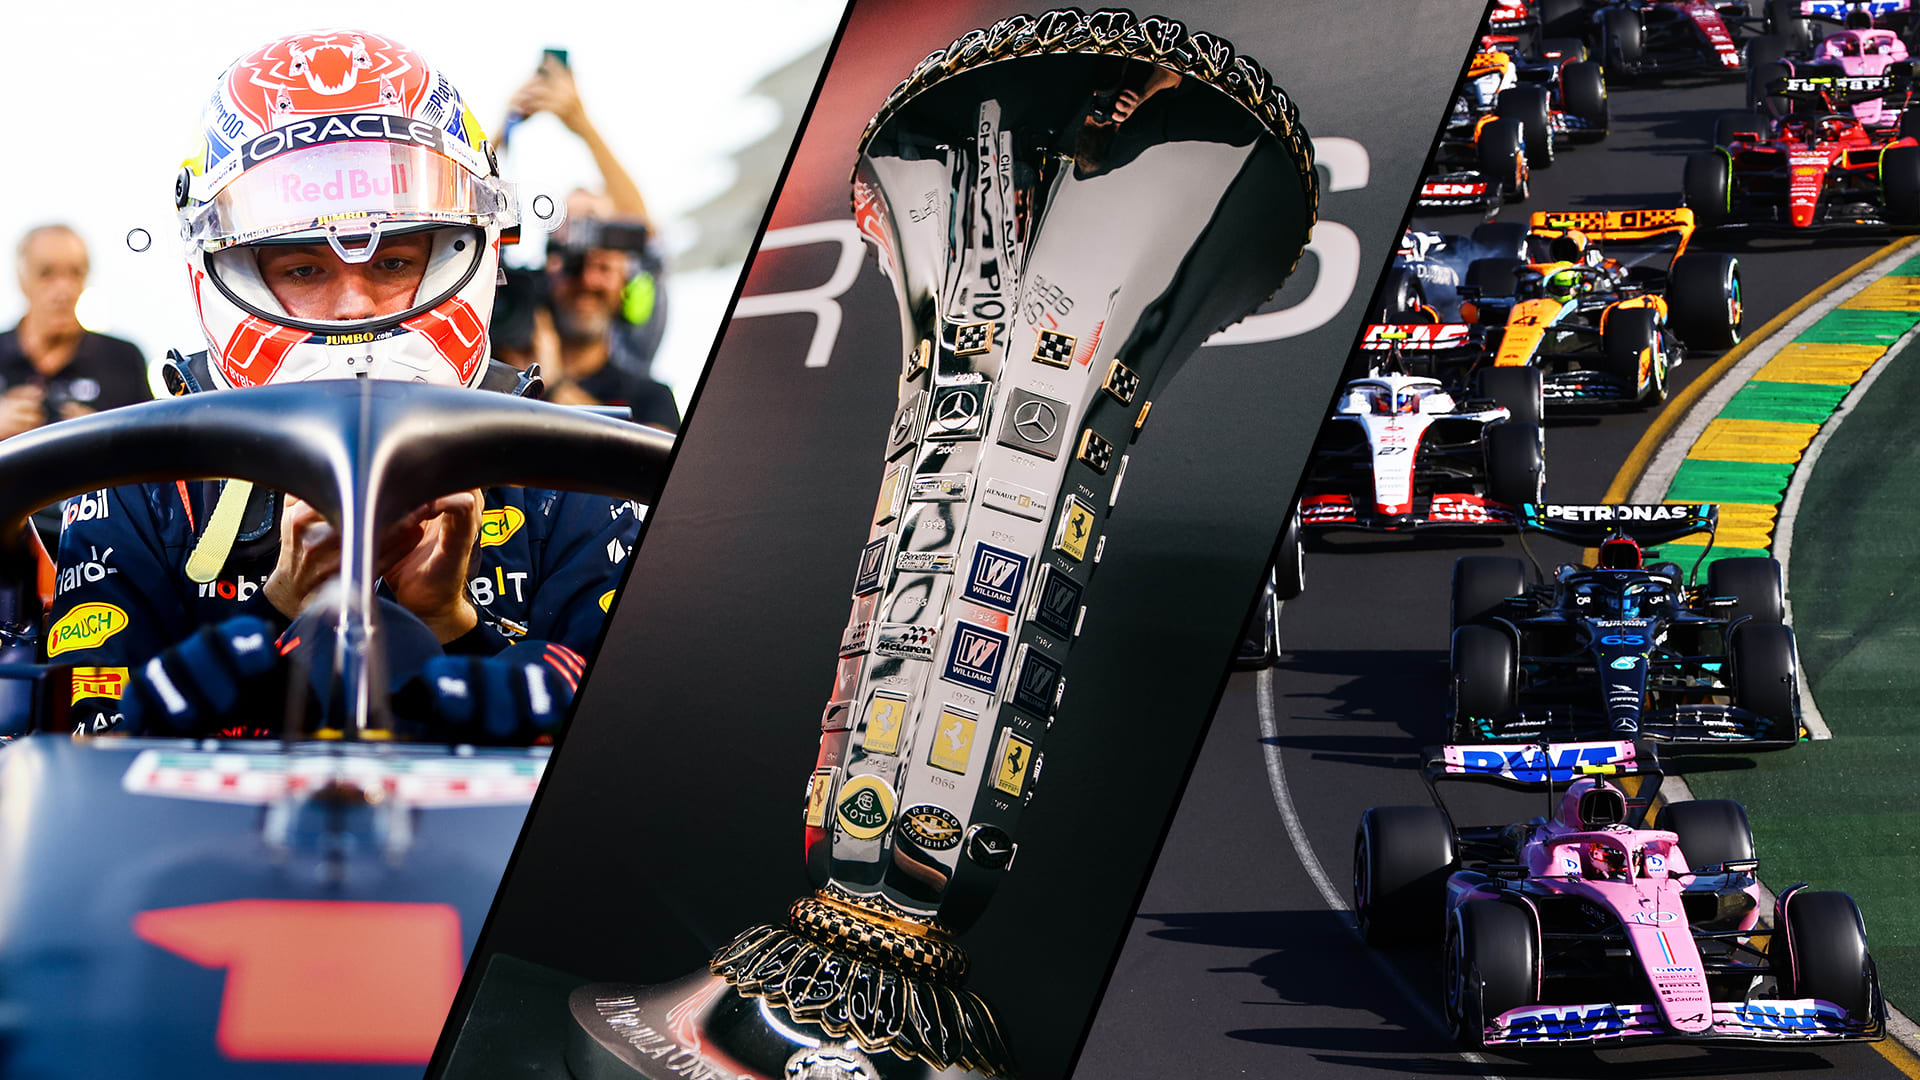 Everything you need to know about F1 – Drivers, teams, cars